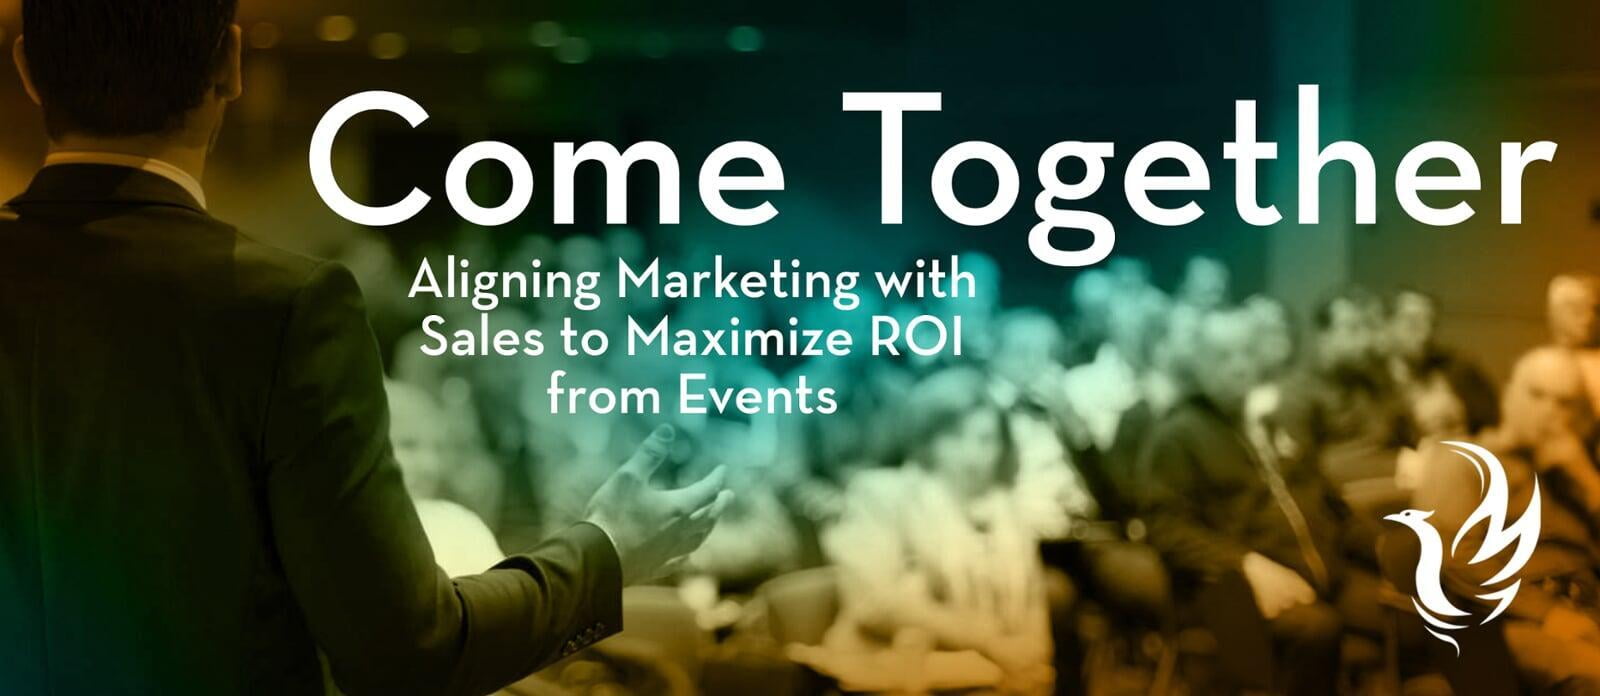 Come Together: Aligning Marketing with Sales to Maximize ROI from Events